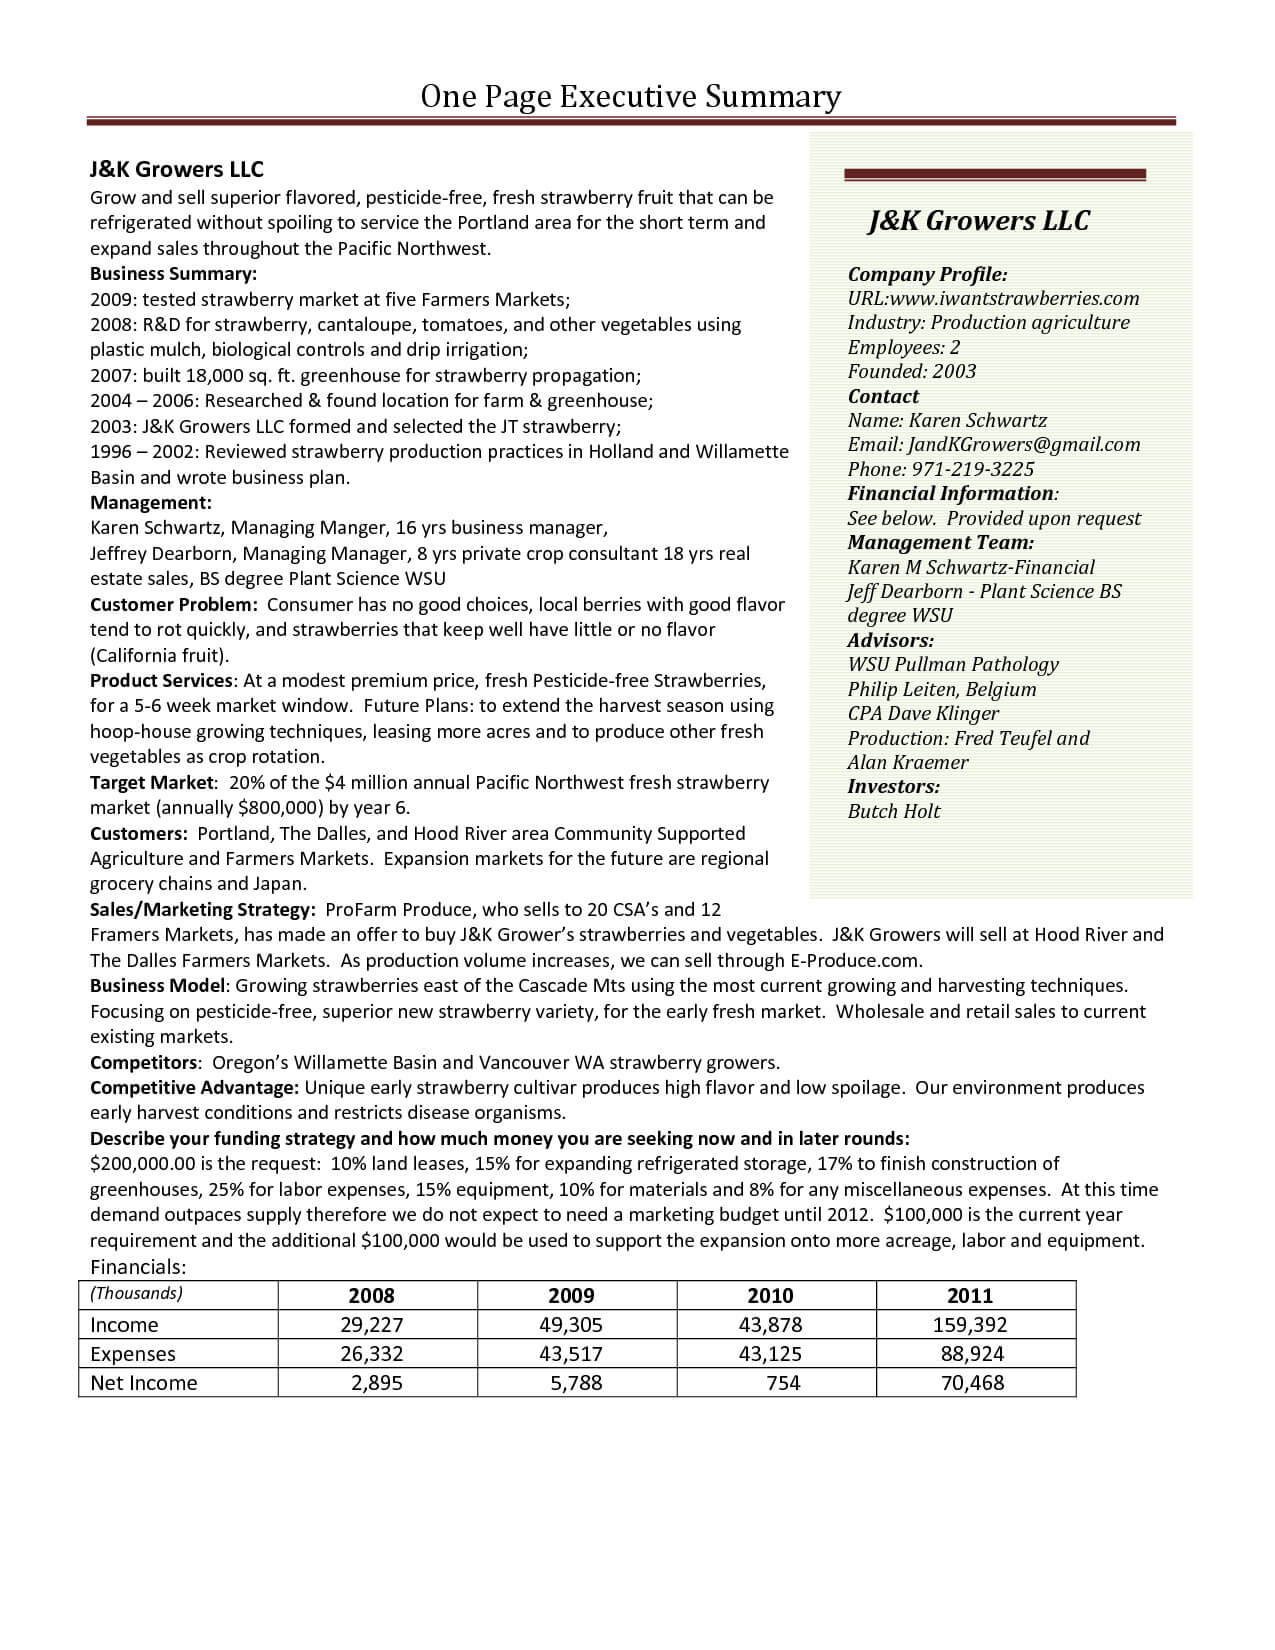 One Page Executive Summary Template | Dattstar With Regard To One Page Book Report Template